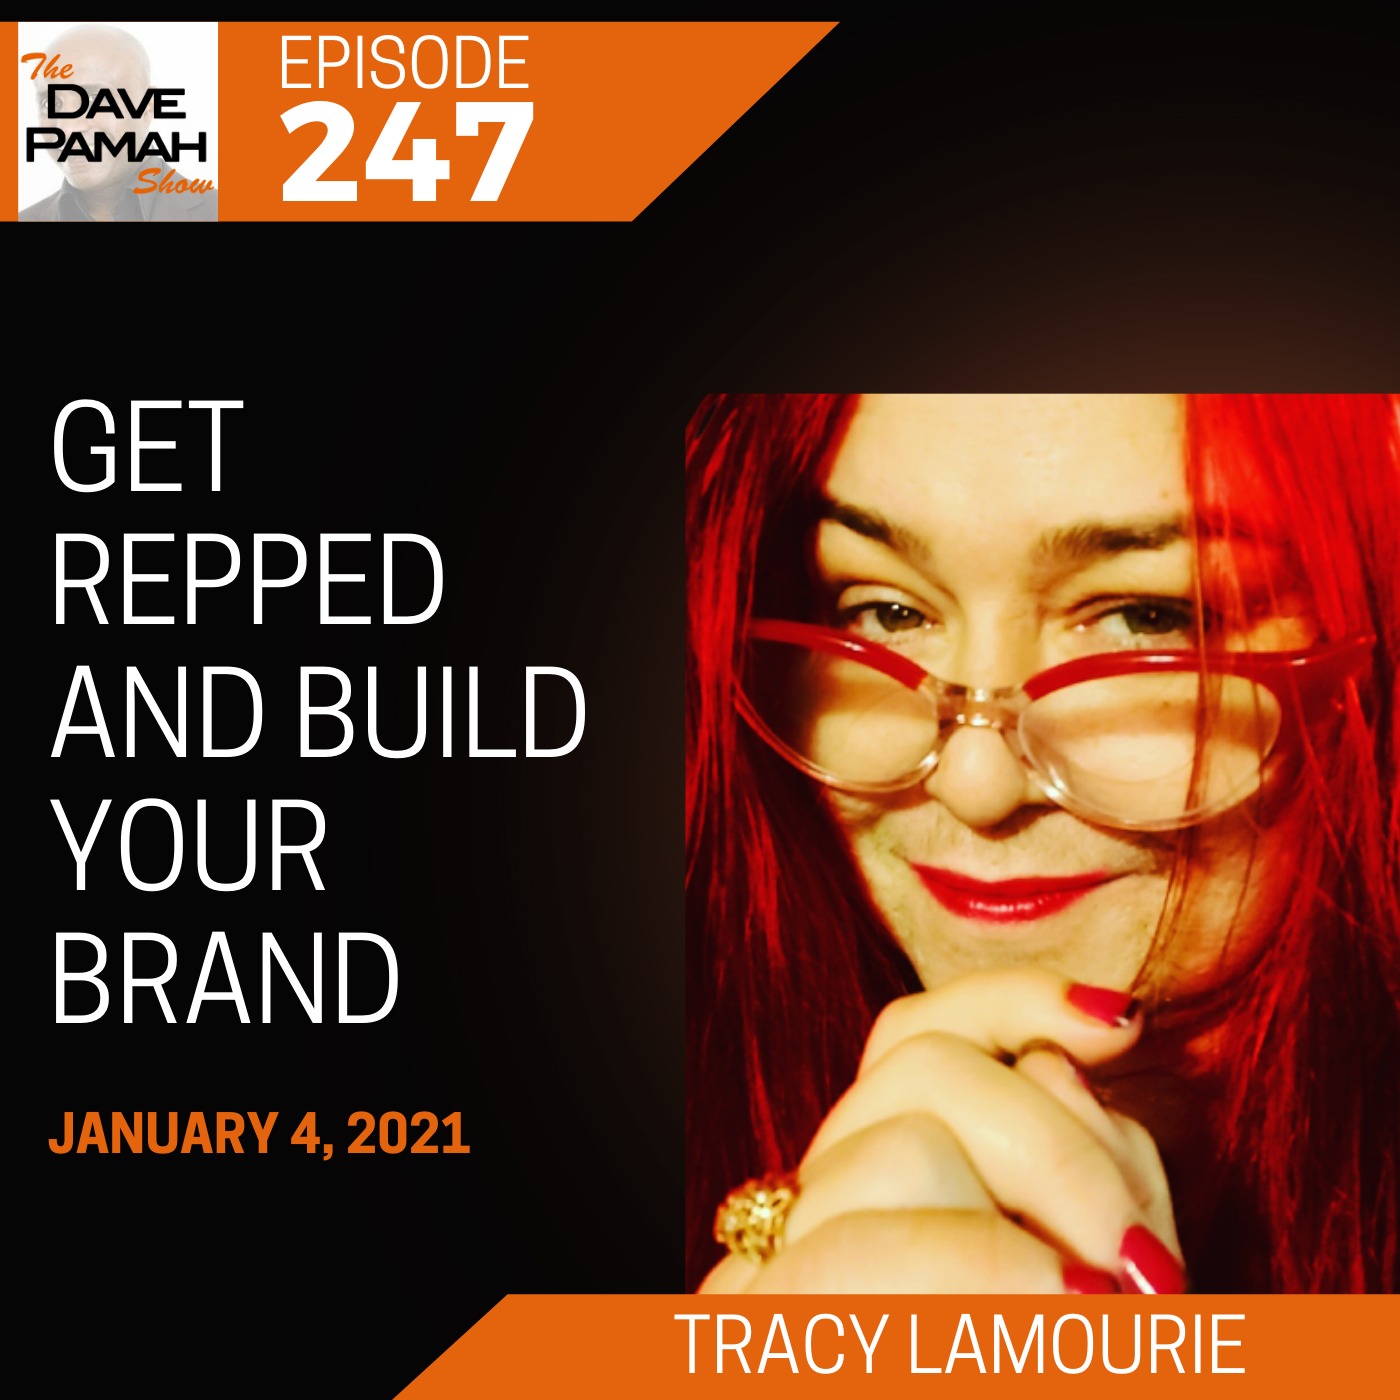 Get Repped and Build Your Brand with Tracy Lamourie